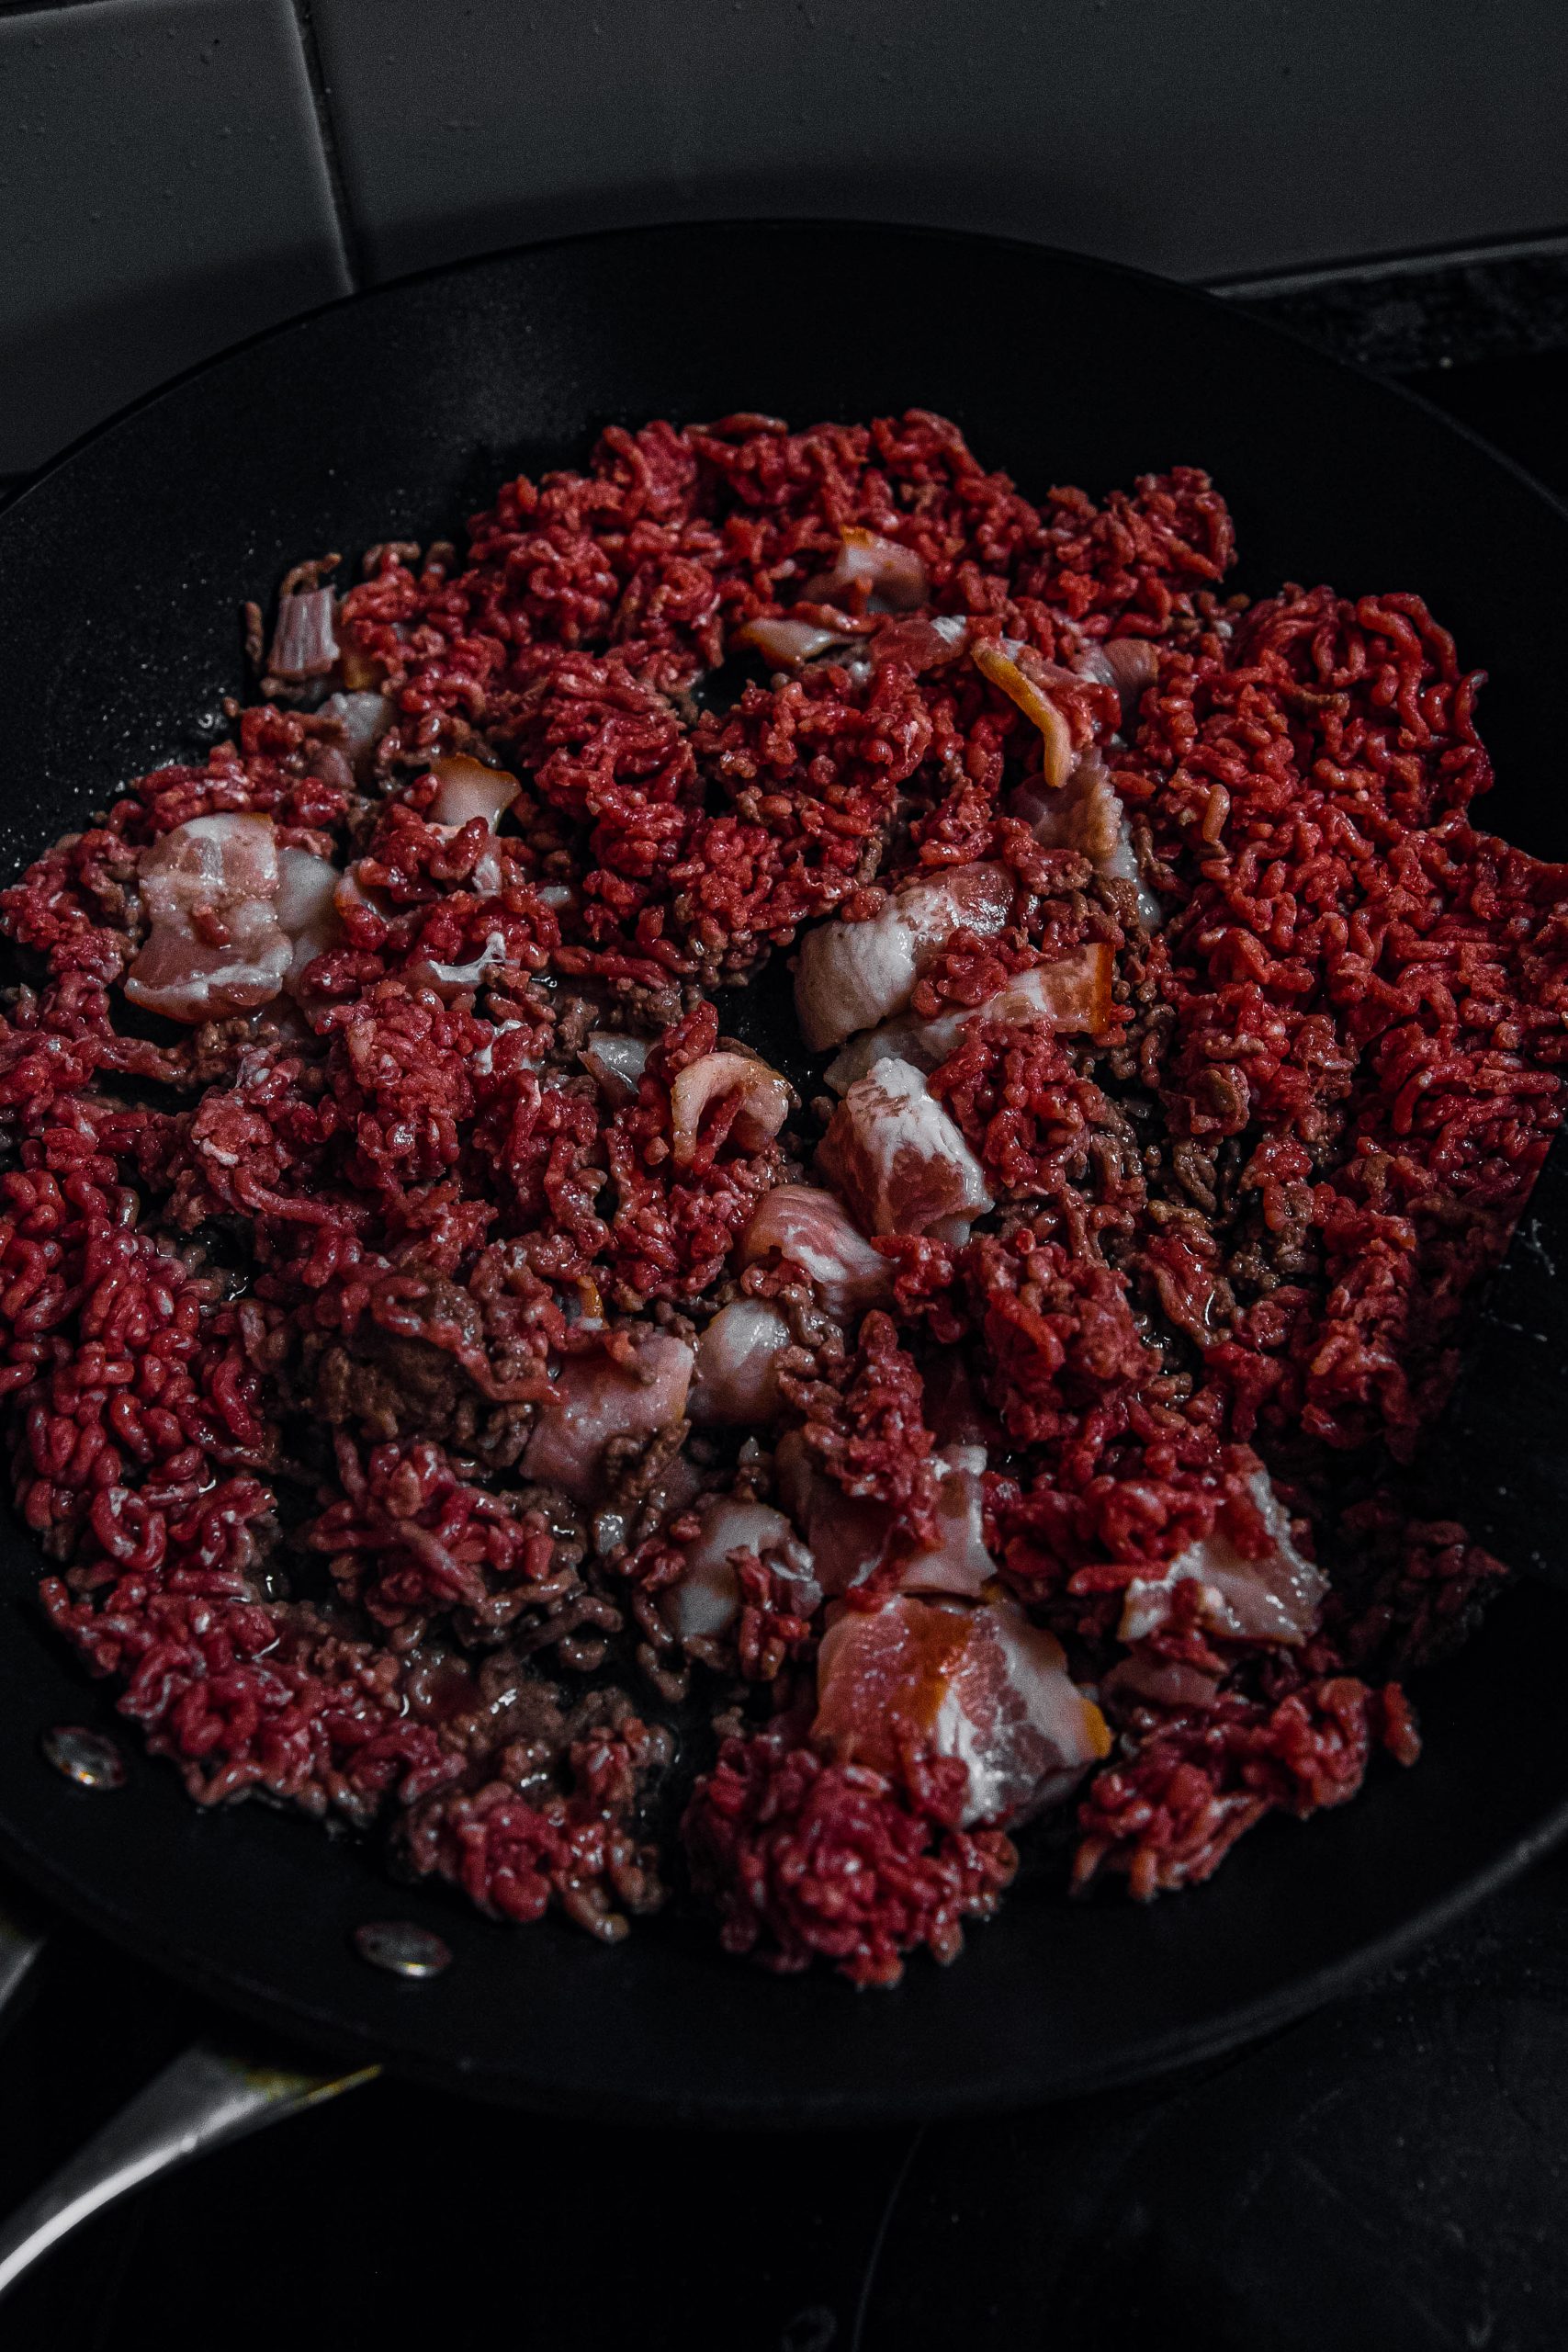 In a large, wide skillet, add the bacon and ground beef. Stir constantly and cook over medium-high heat until golden brown.